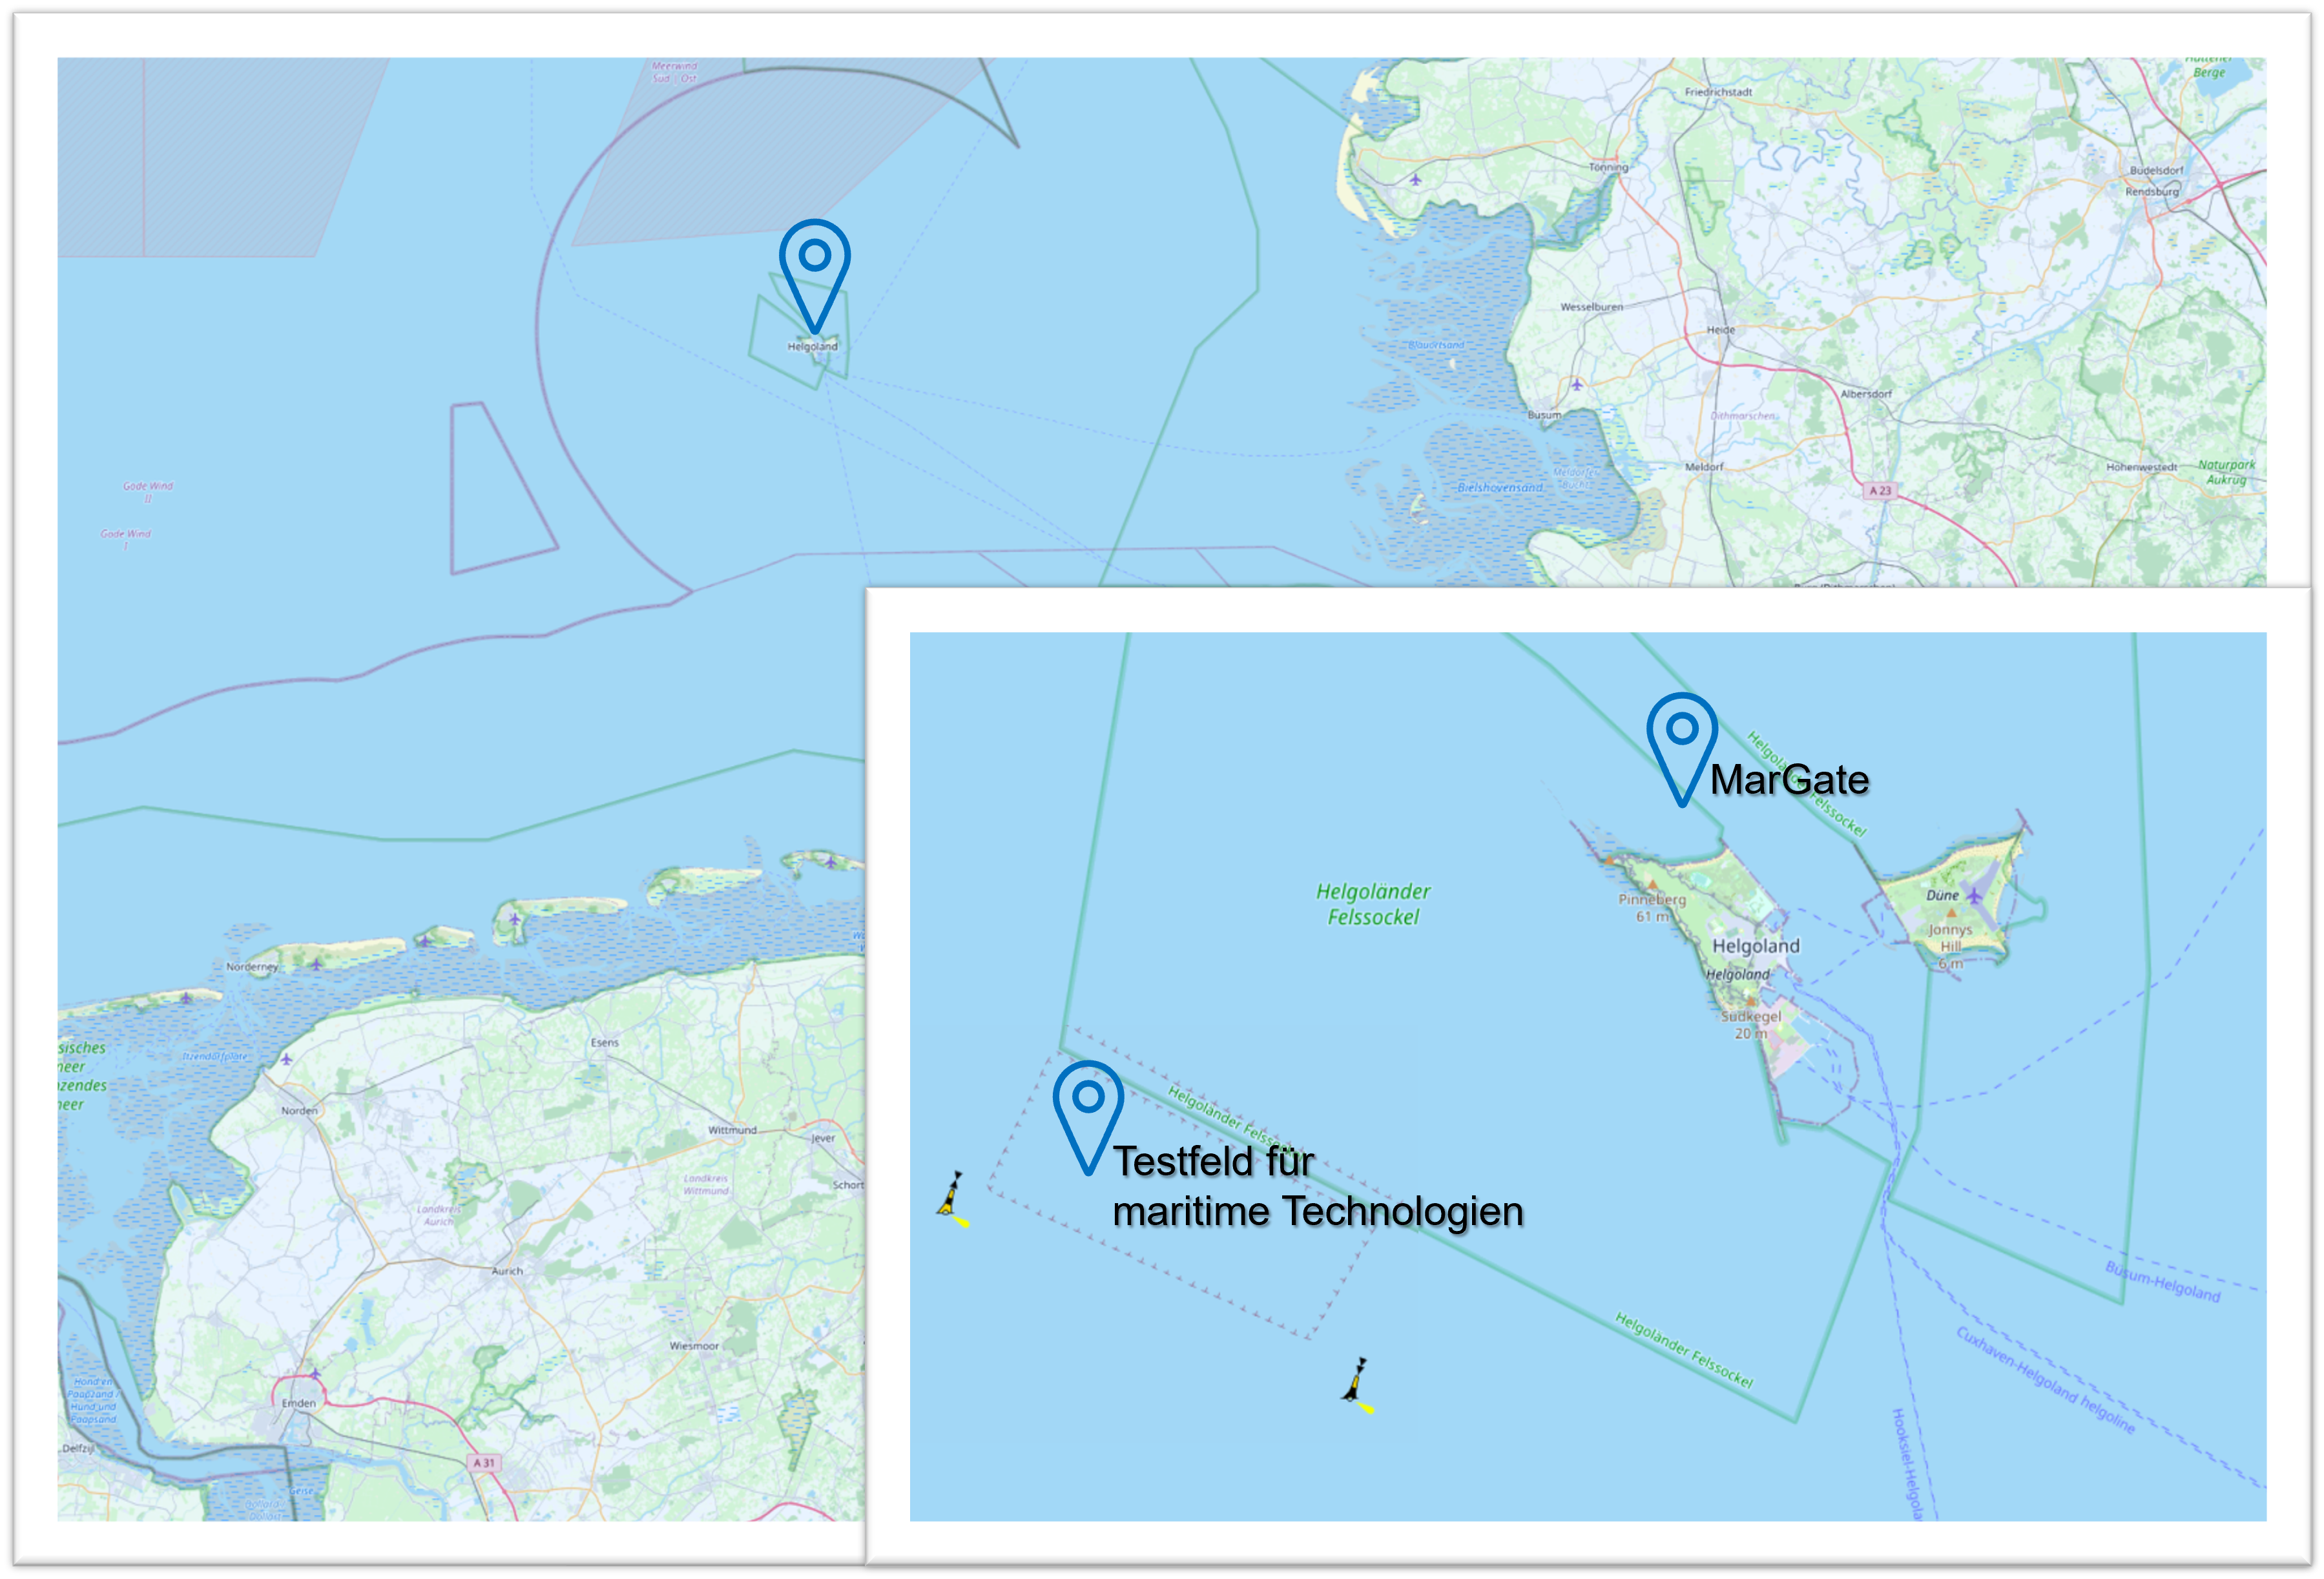 Locations of the test field for maritime technologies of Fraunhofer IFAM and "MarGate" AWI Center for Scientific Diving both near Helgoland